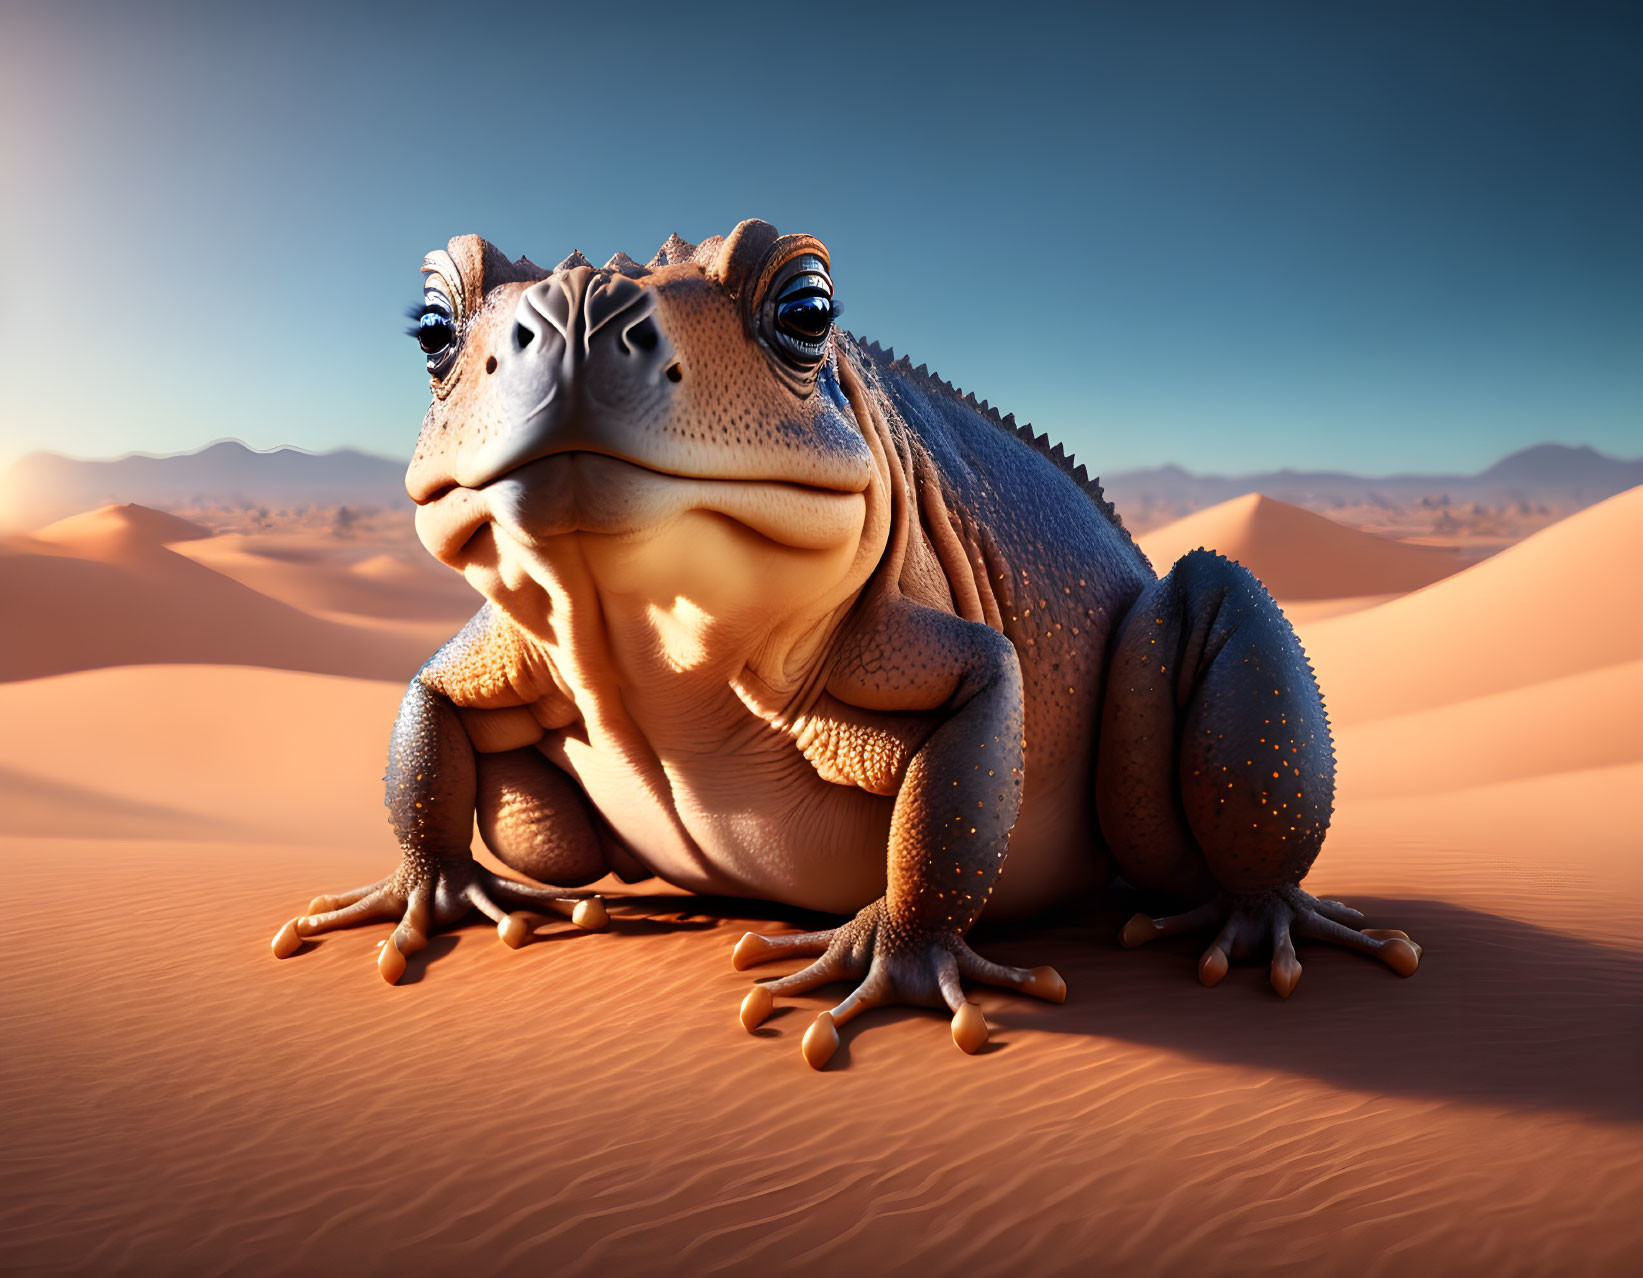 Detailed digital artwork: Large toad with human-like eyes on sand dunes under clear sky